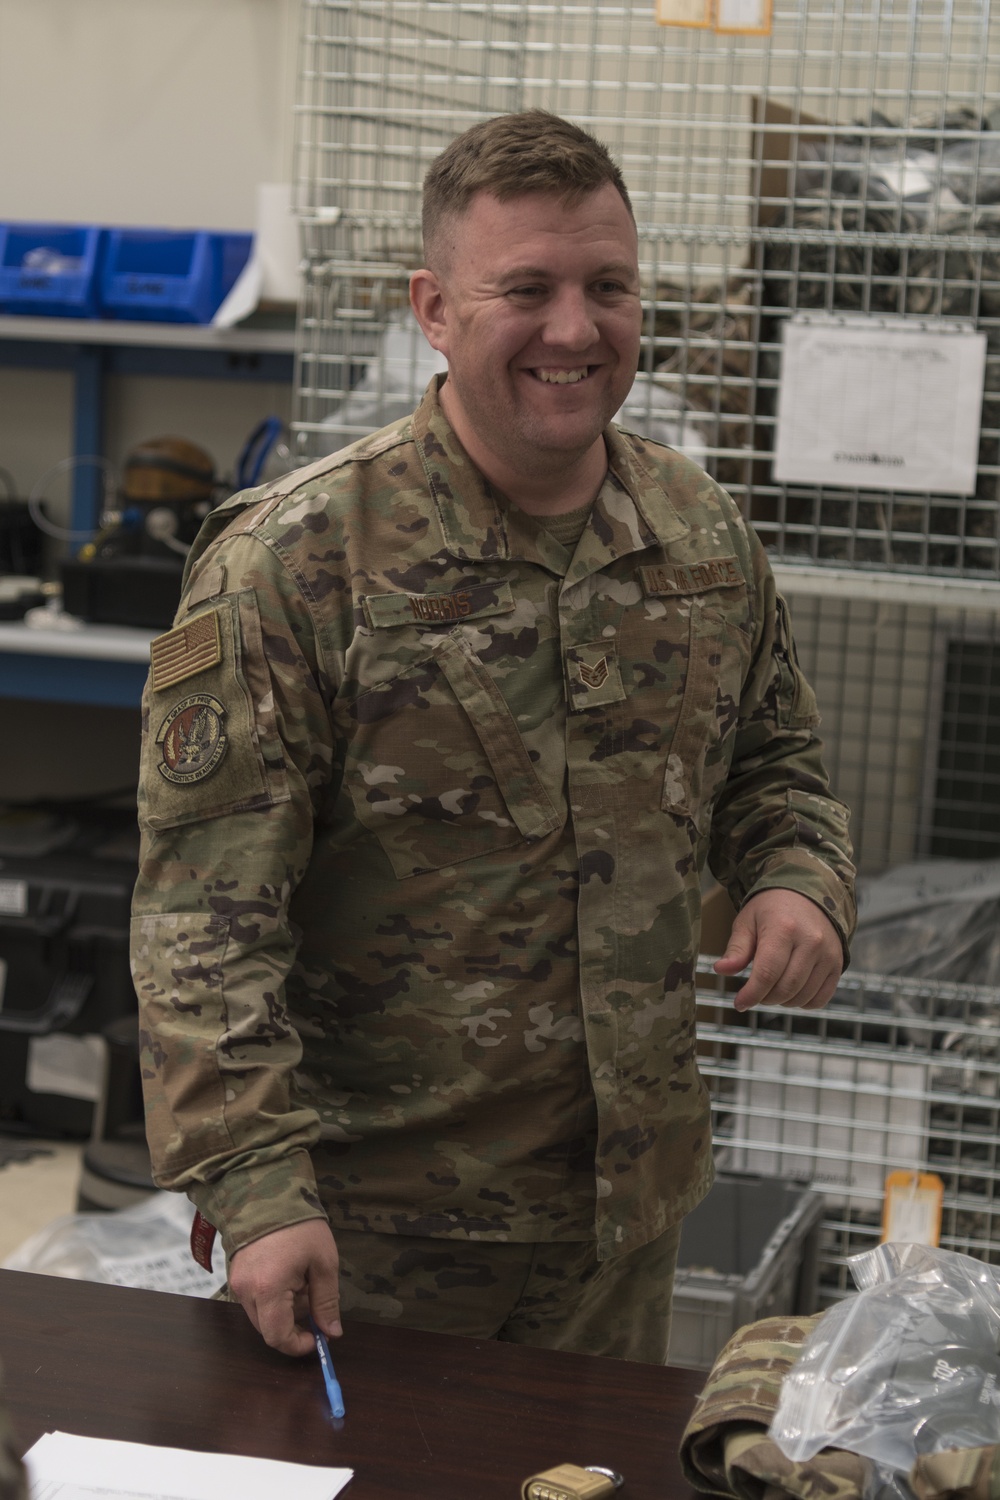 Staff Sgt. Zach Norris helps during readiness exercise